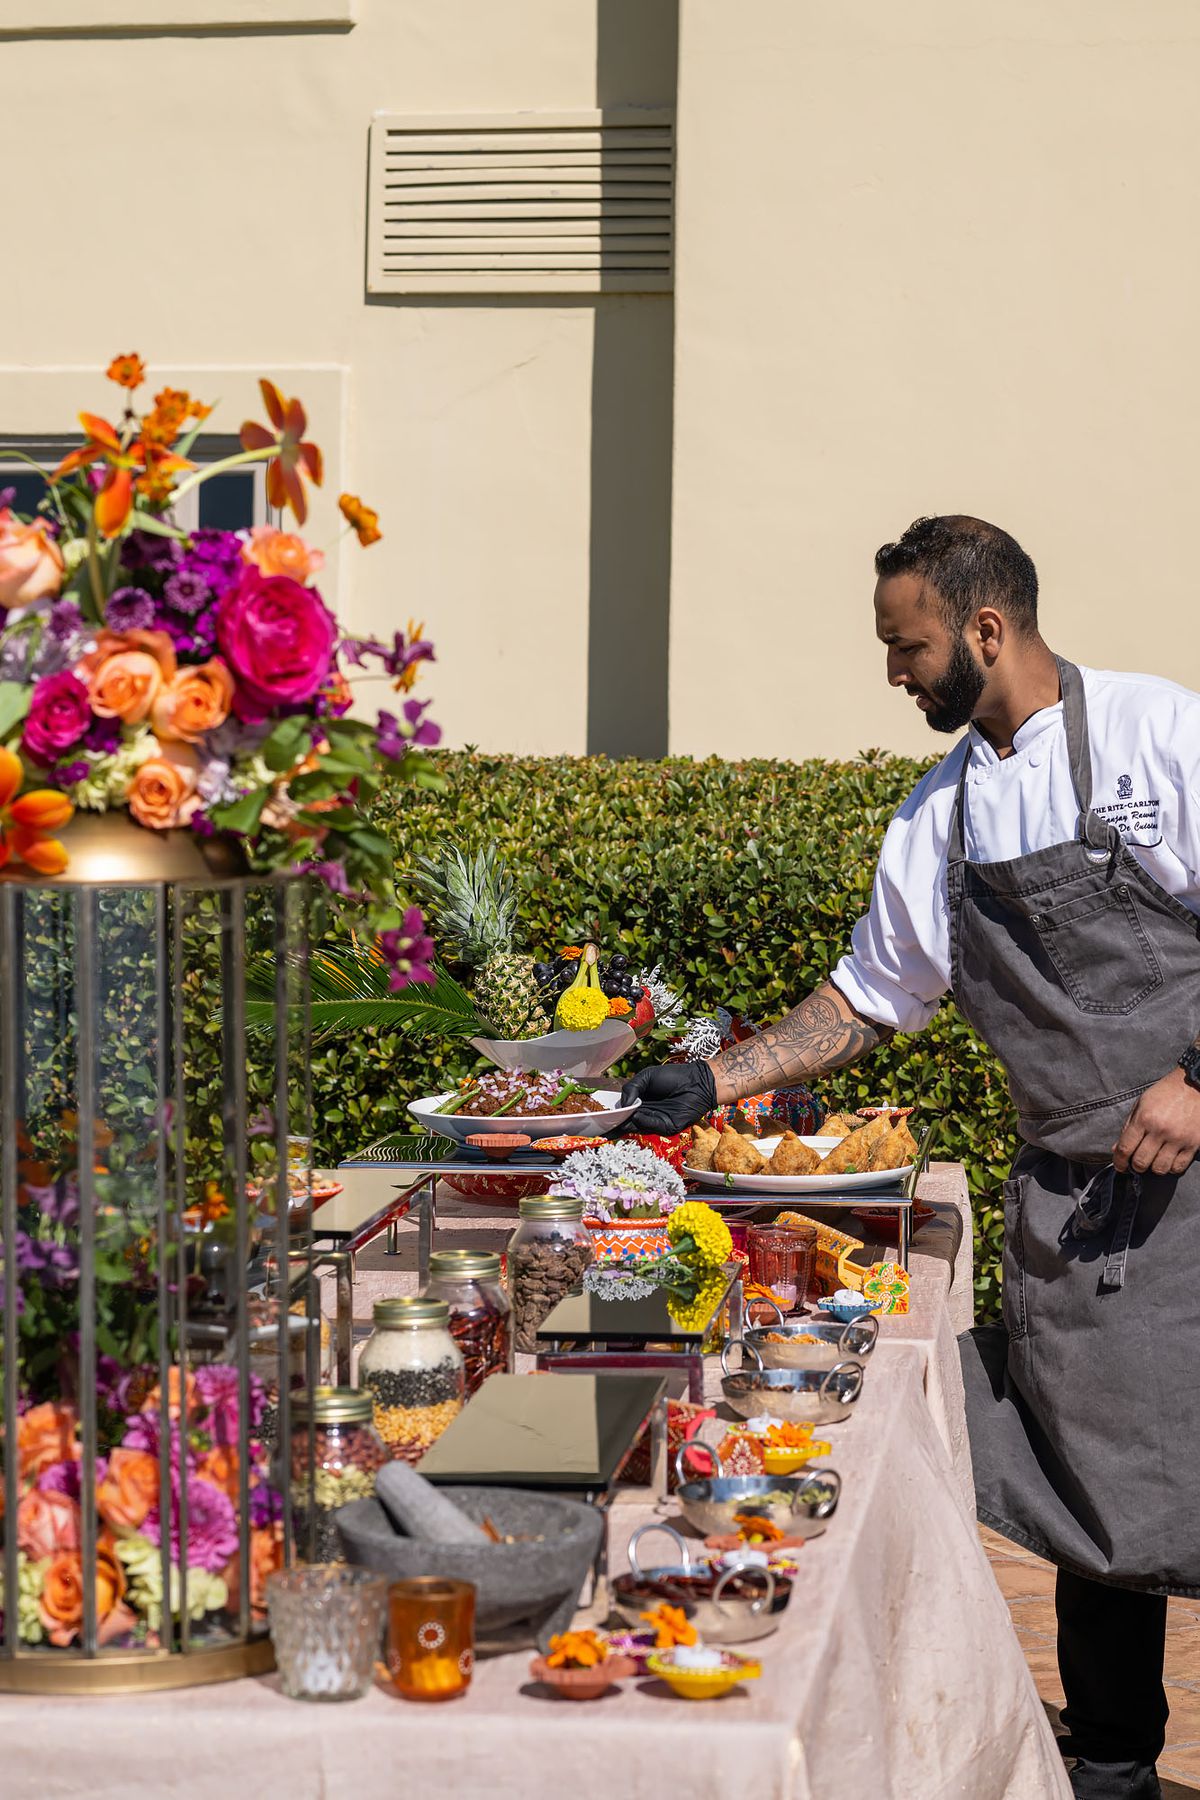 A man of Indian descent places a prepared dish onto a colorful buffet spread.